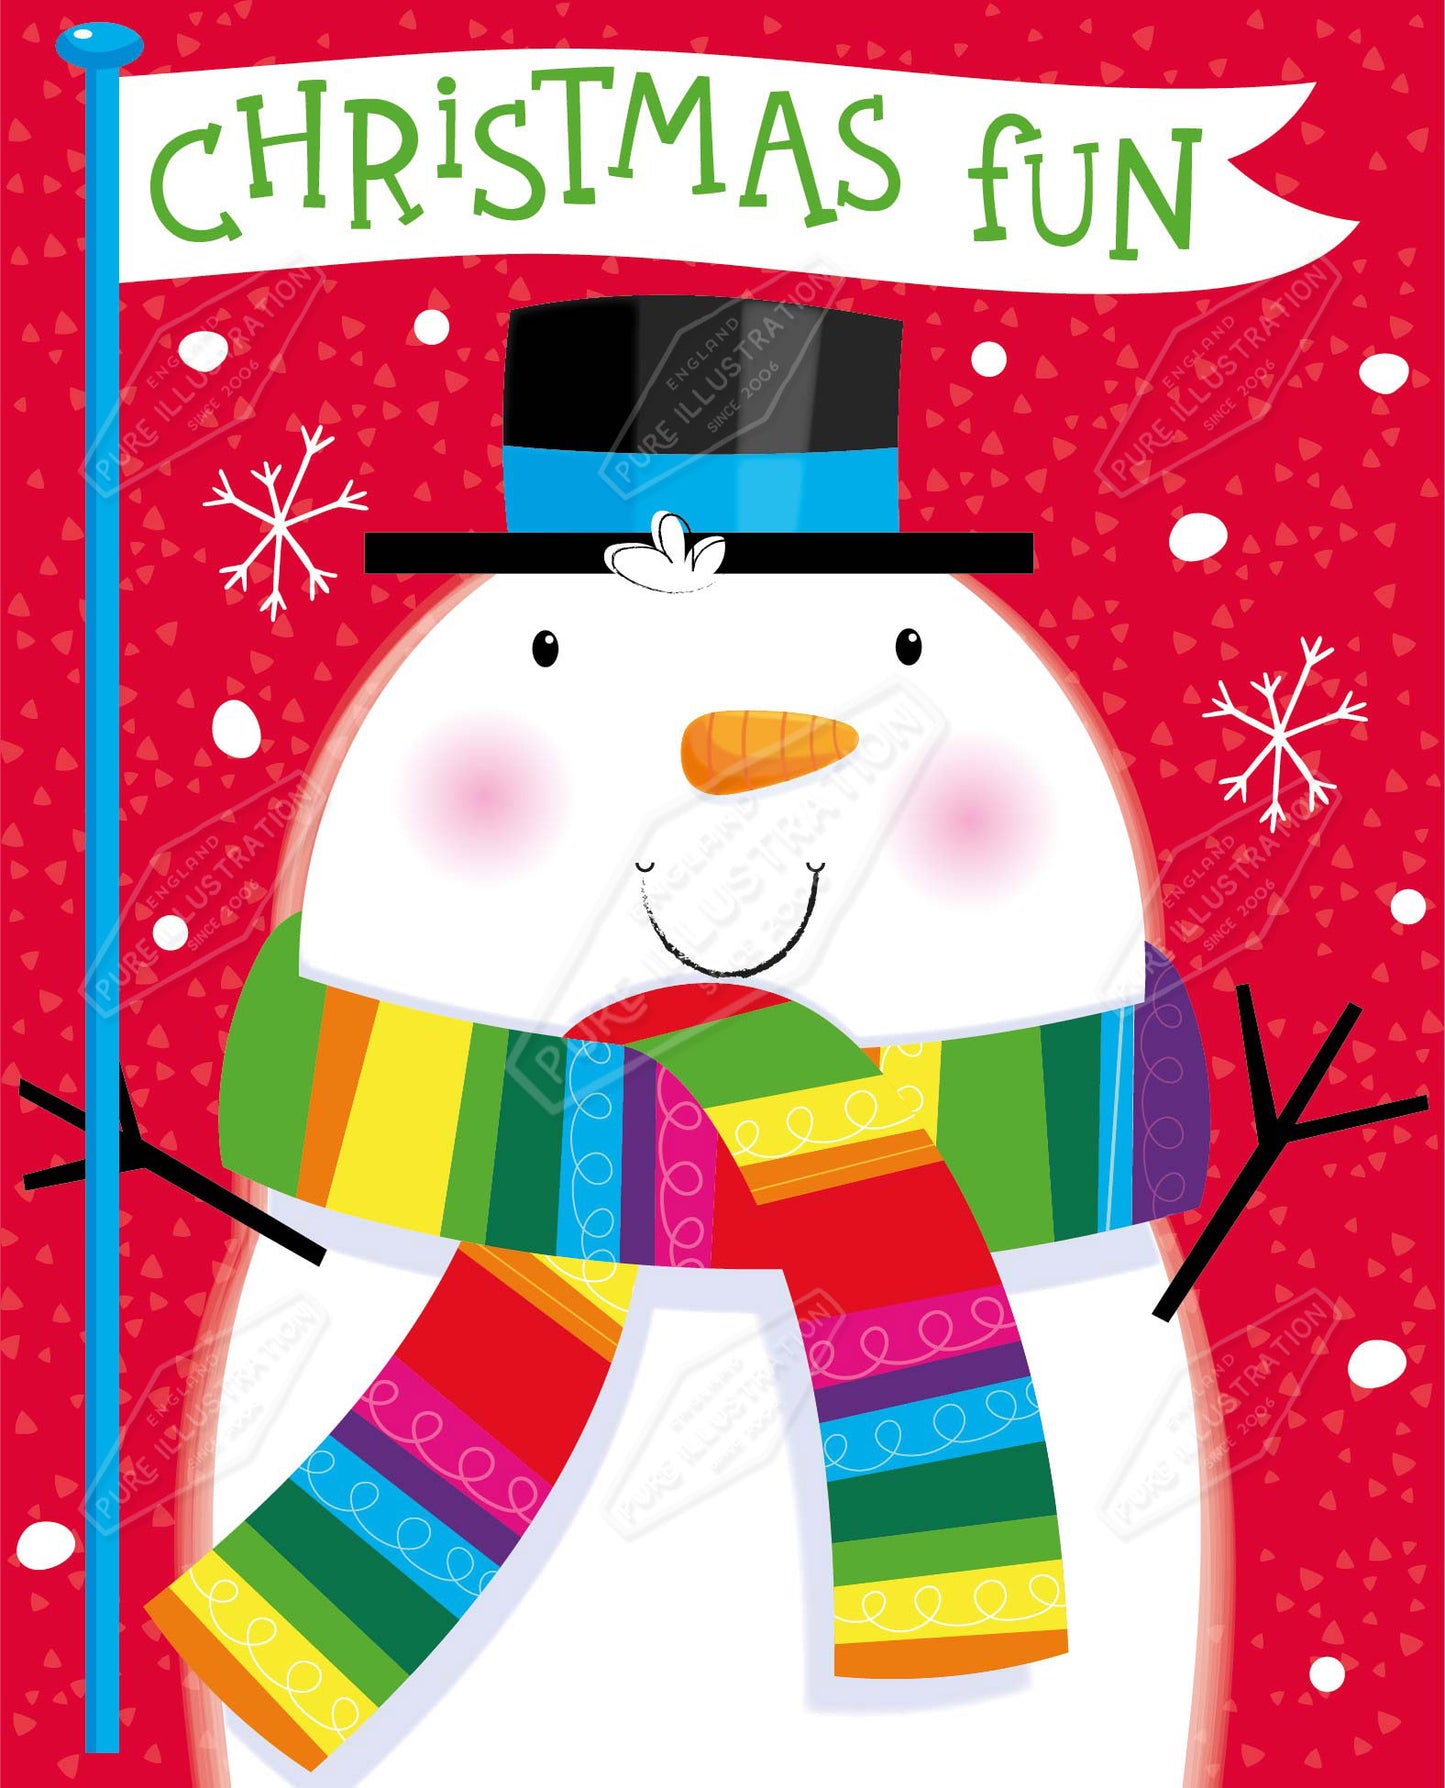 00035189SPI- Sarah Pitt is represented by Pure Art Licensing Agency - Christmas Greeting Card Design